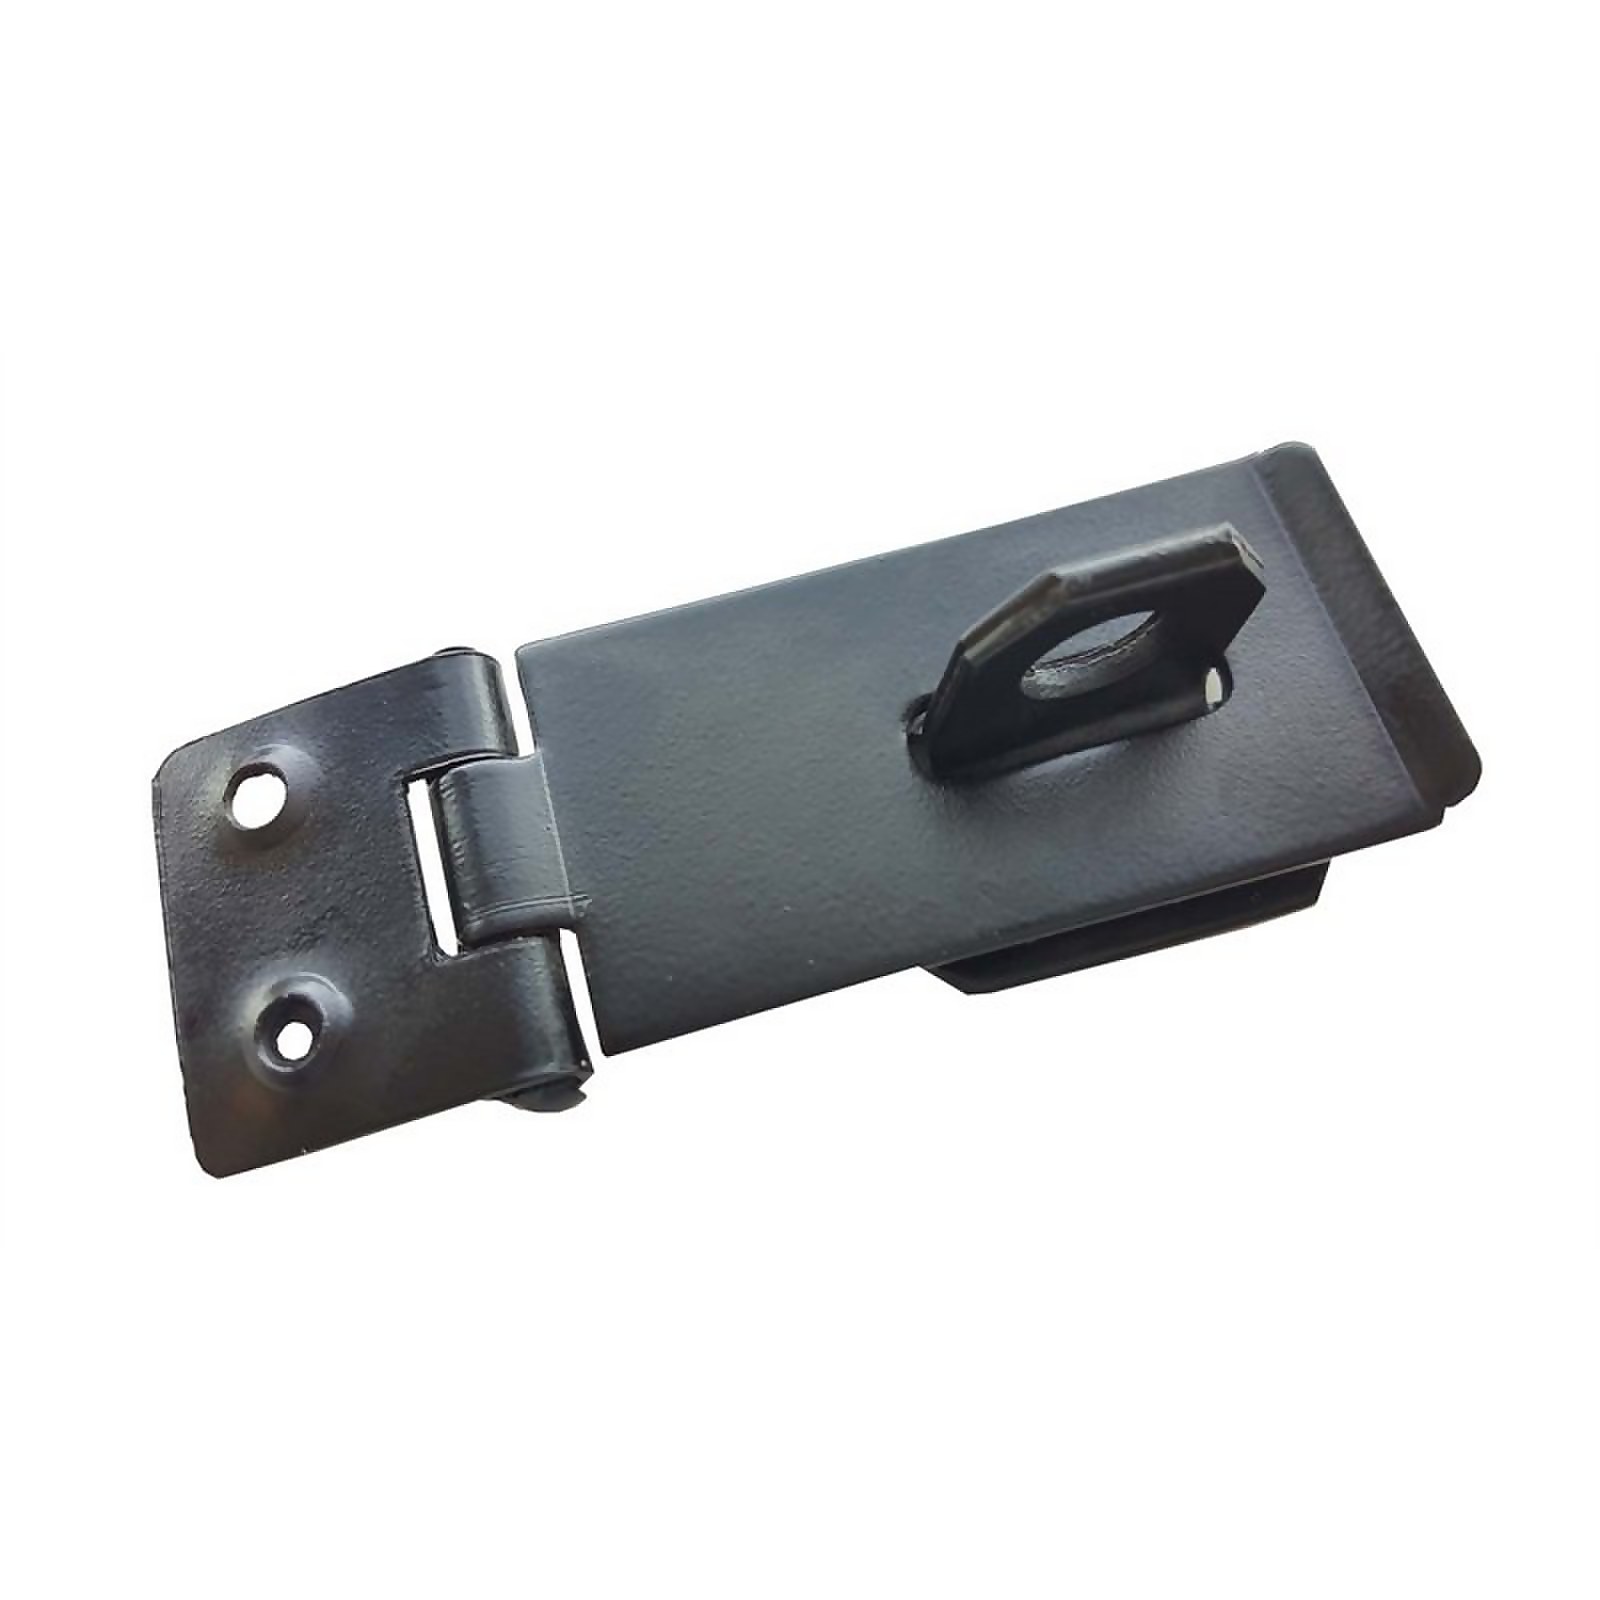 Photo of Safety Hasp & Staple - Black - 76mm